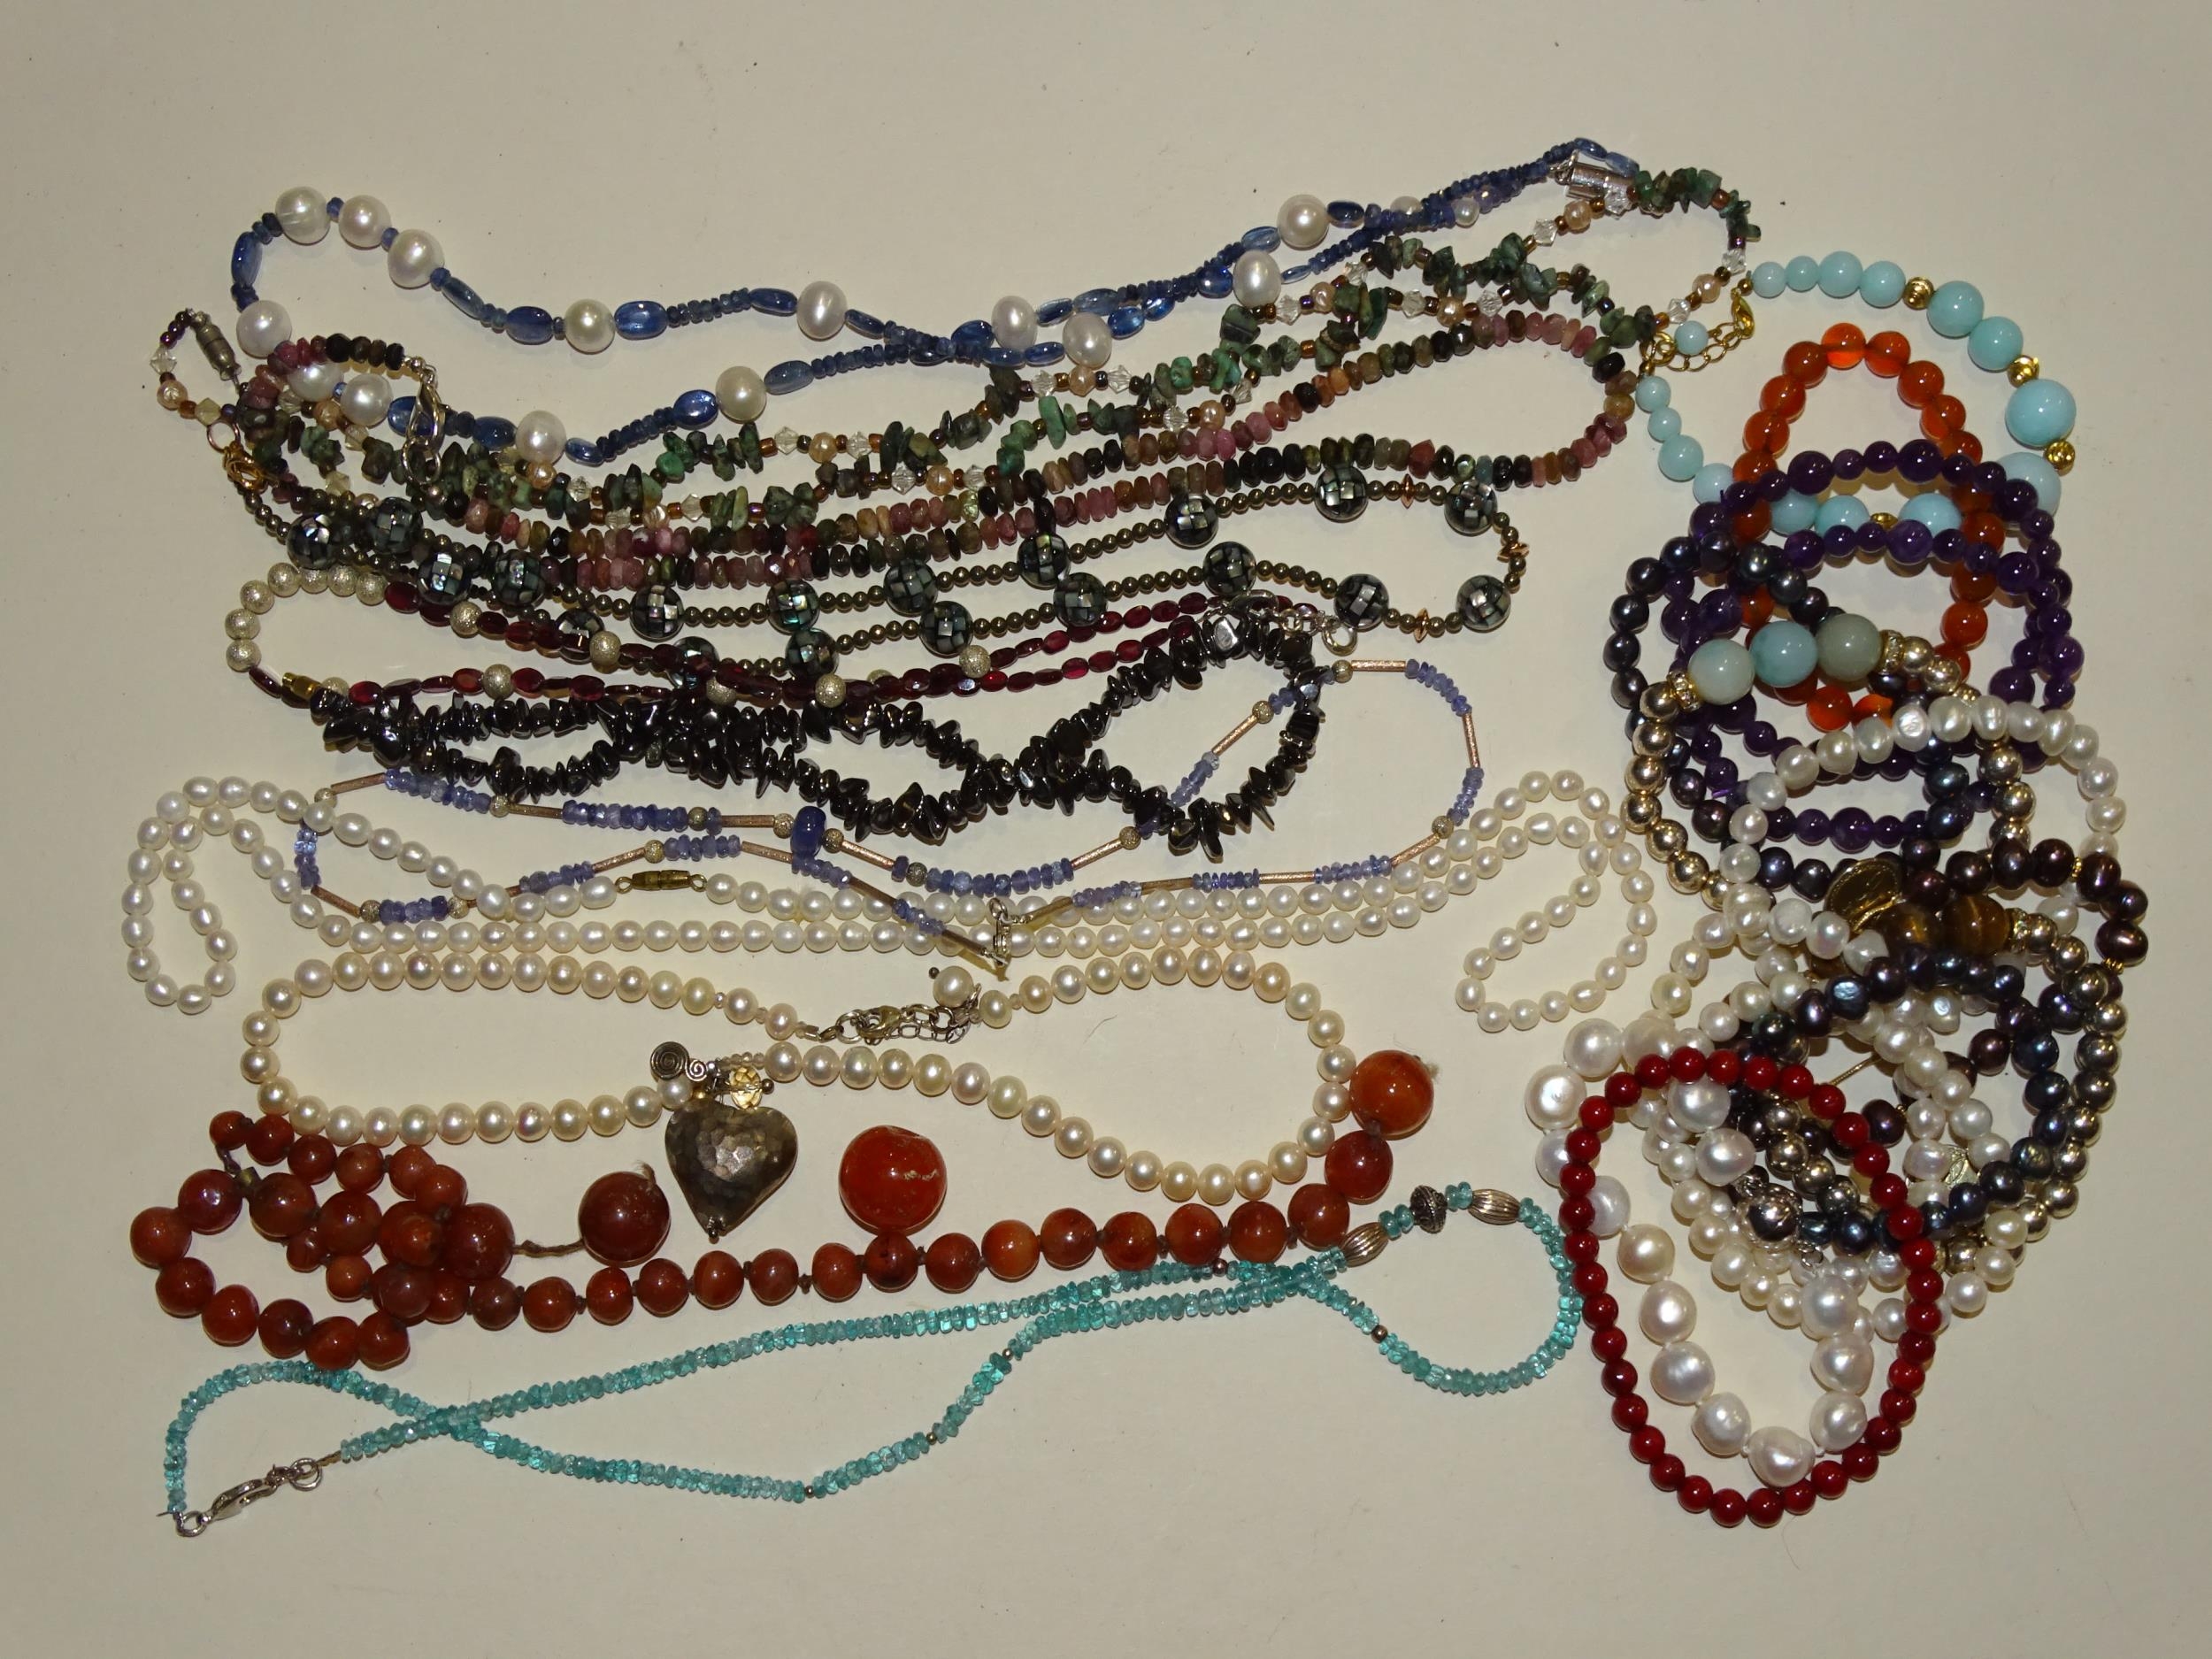 A Tanzanite bead necklace and a quantity of freshwater pearl and gemstone necklaces and bracelets.